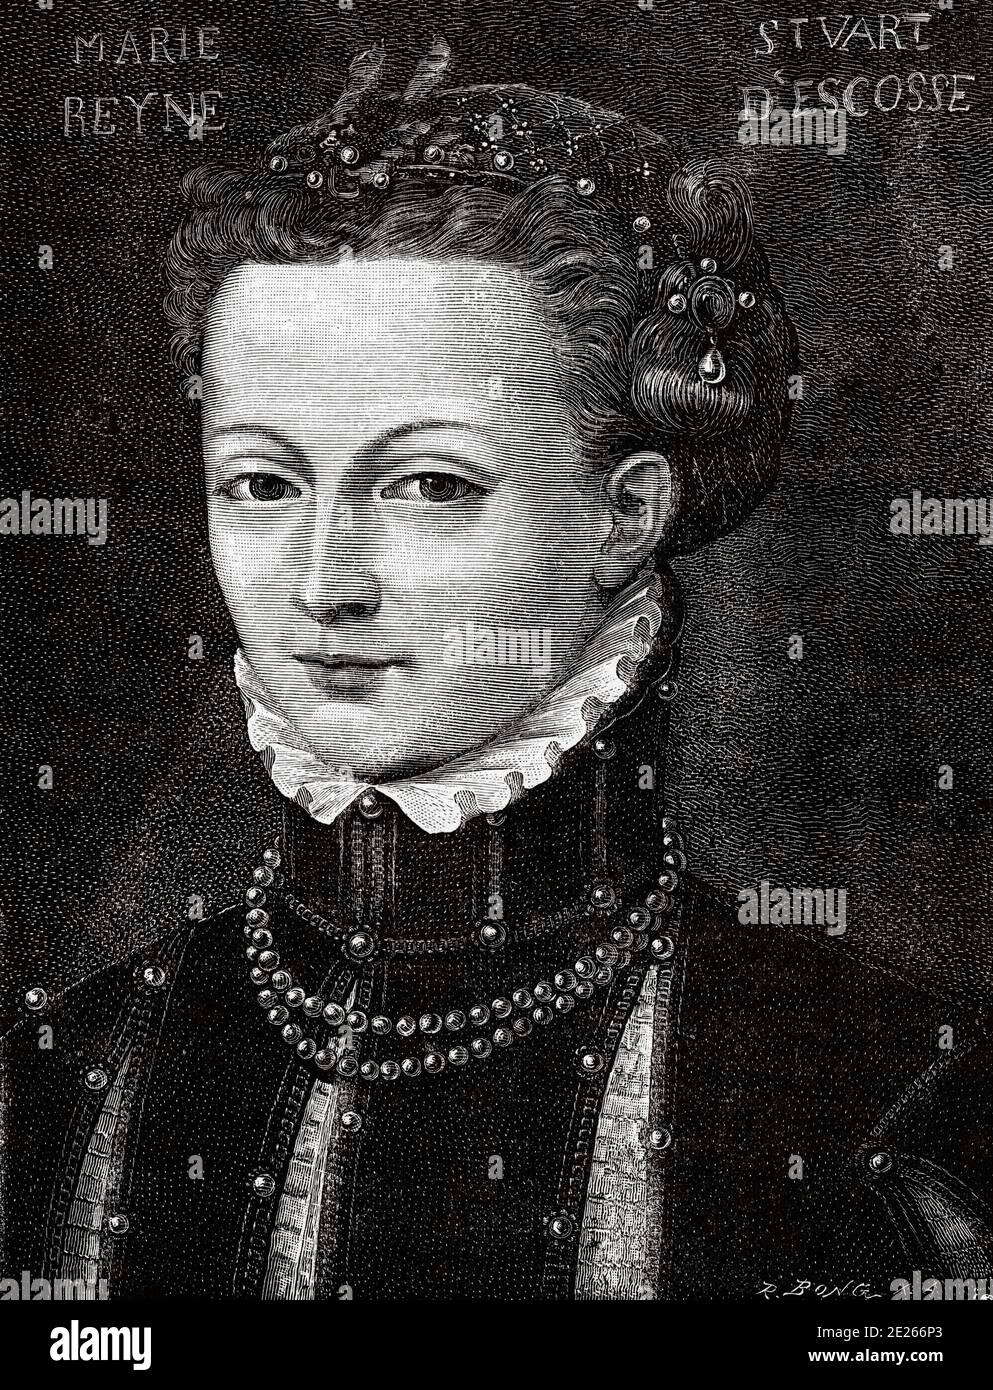 Portrait of Mary I, called Mary Stuart. Mary Stewart Marie Steuart, December 8, 1542 - February 8, 1587), was Queen of Scotland from December 14, 1542 to July 24, 1567. History of Philip II of Spain. Old engraving published in Historia de Felipe II by H. Forneron, in 1884 Stock Photo